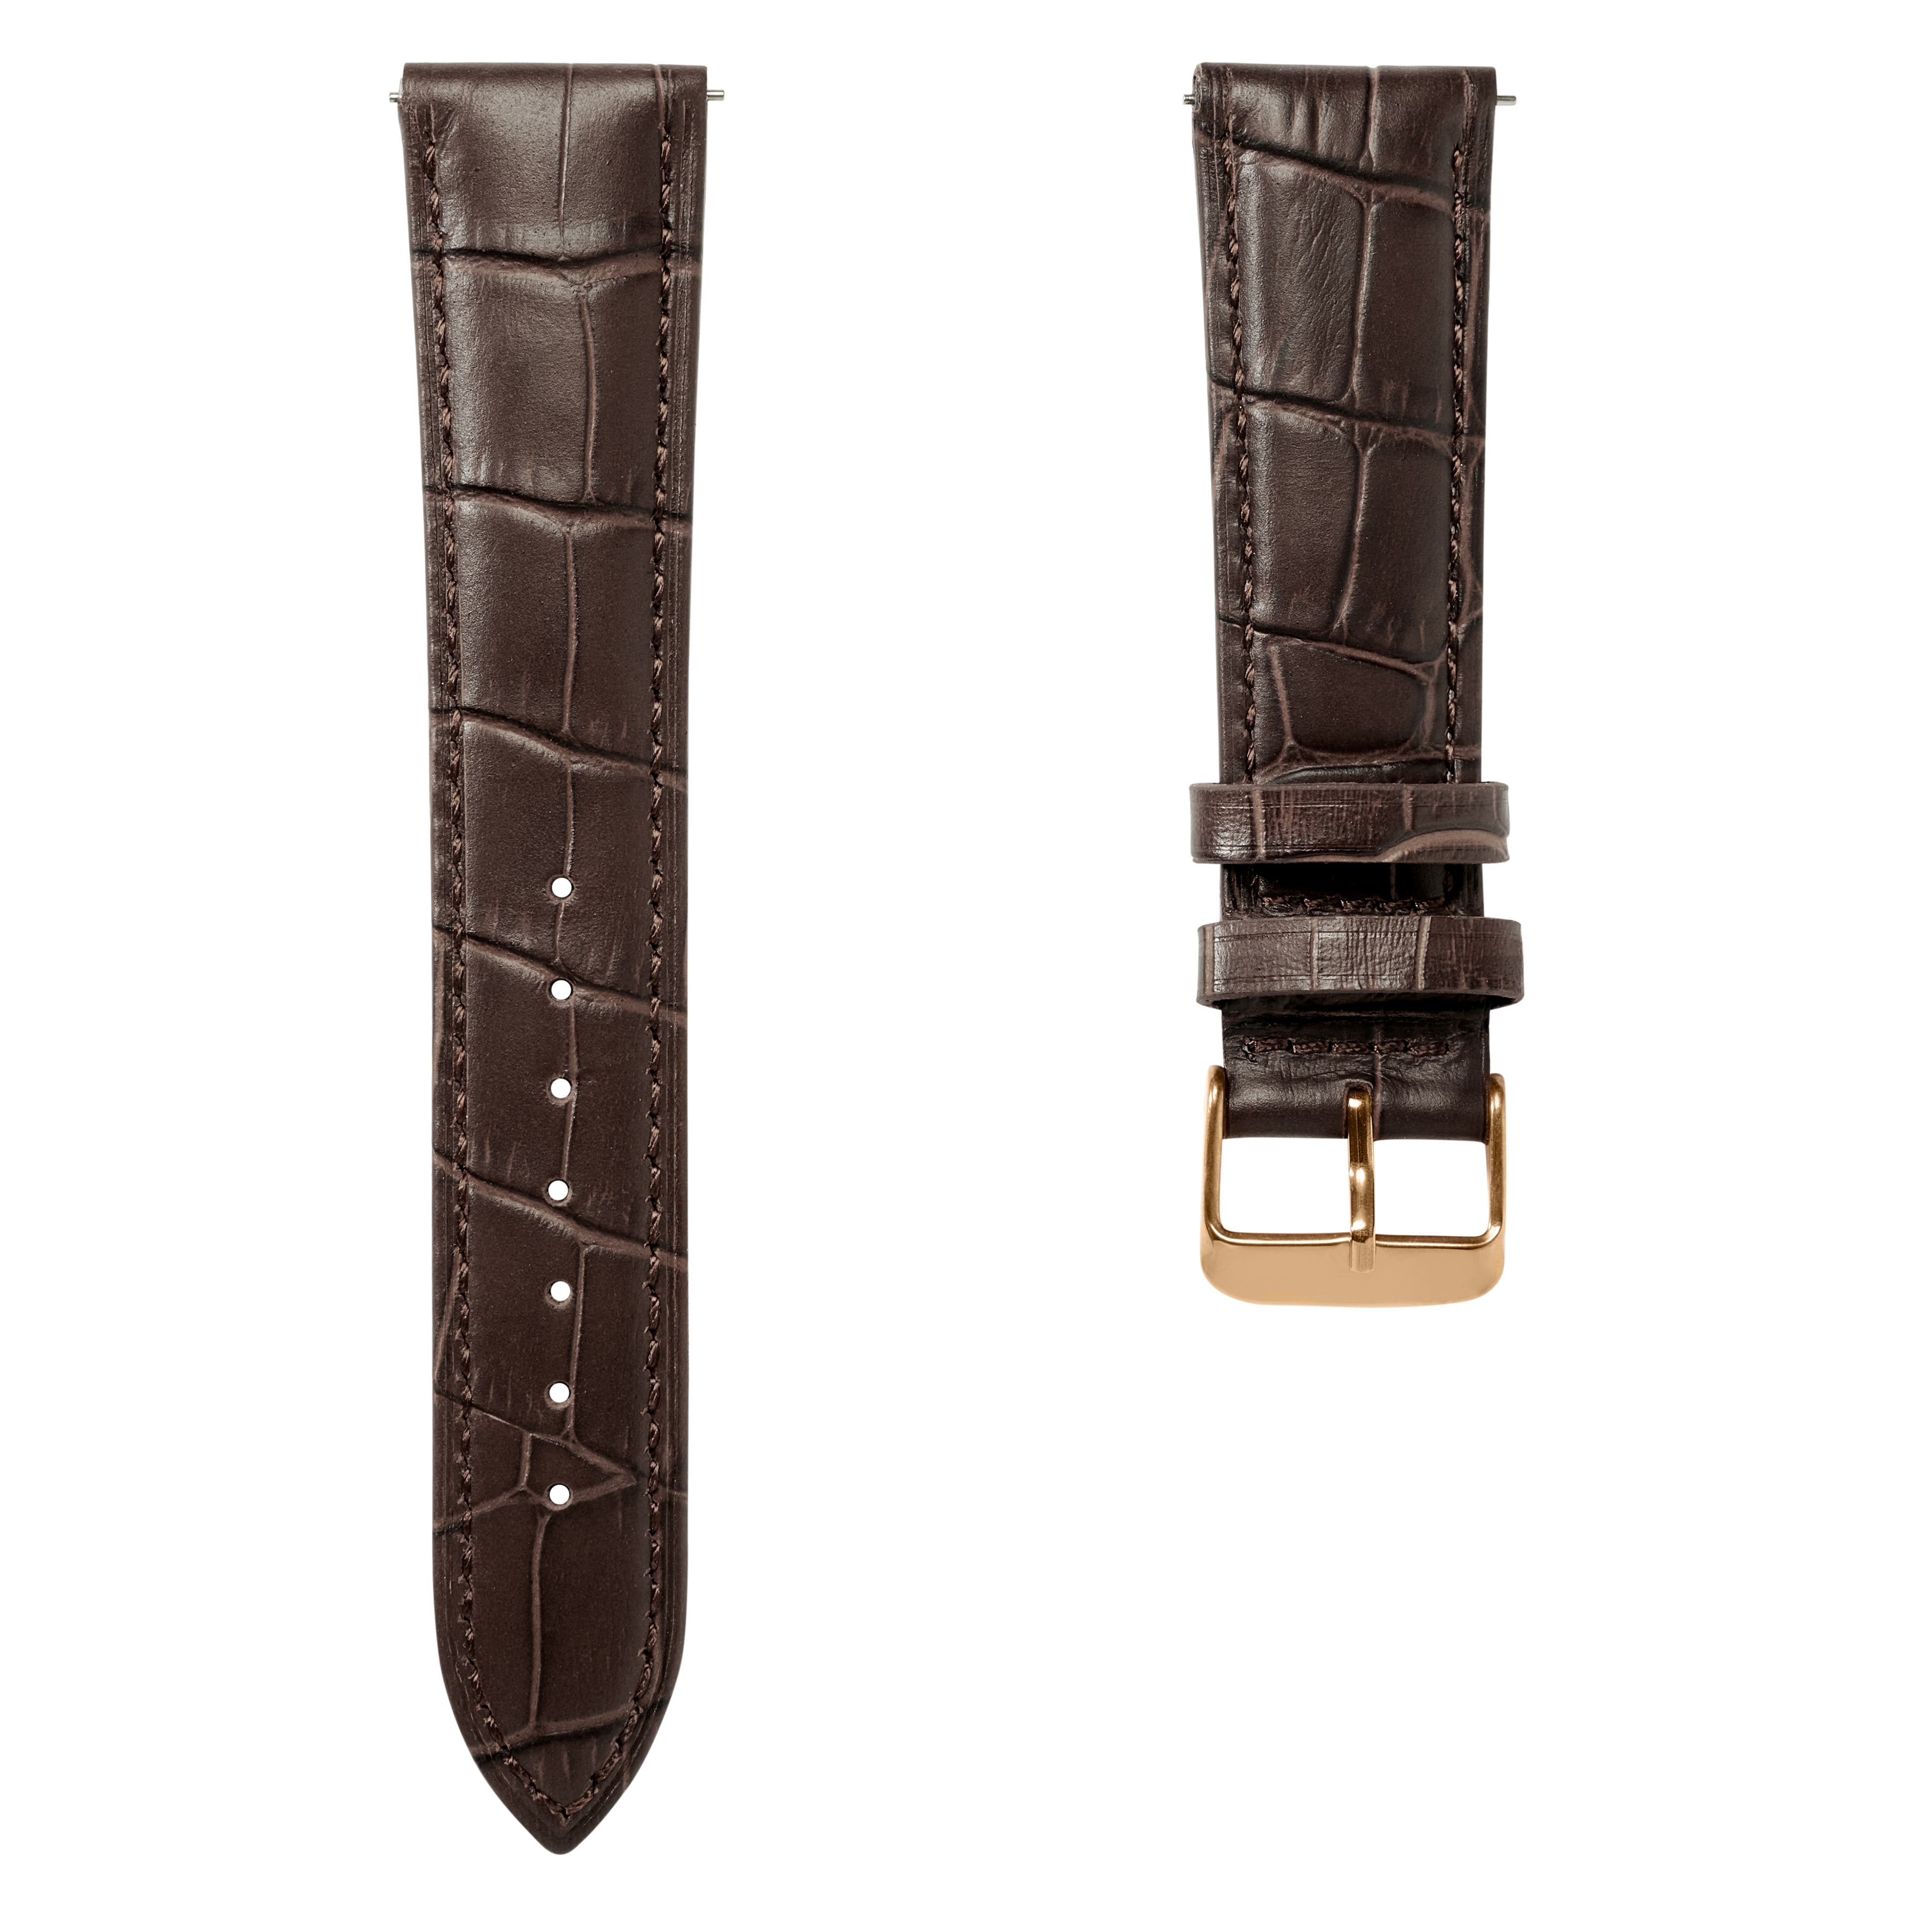 18mm Crocodile-Embossed Dark-Brown Leather Watch Strap with Rose Gold-Tone Buckle – Quick Release